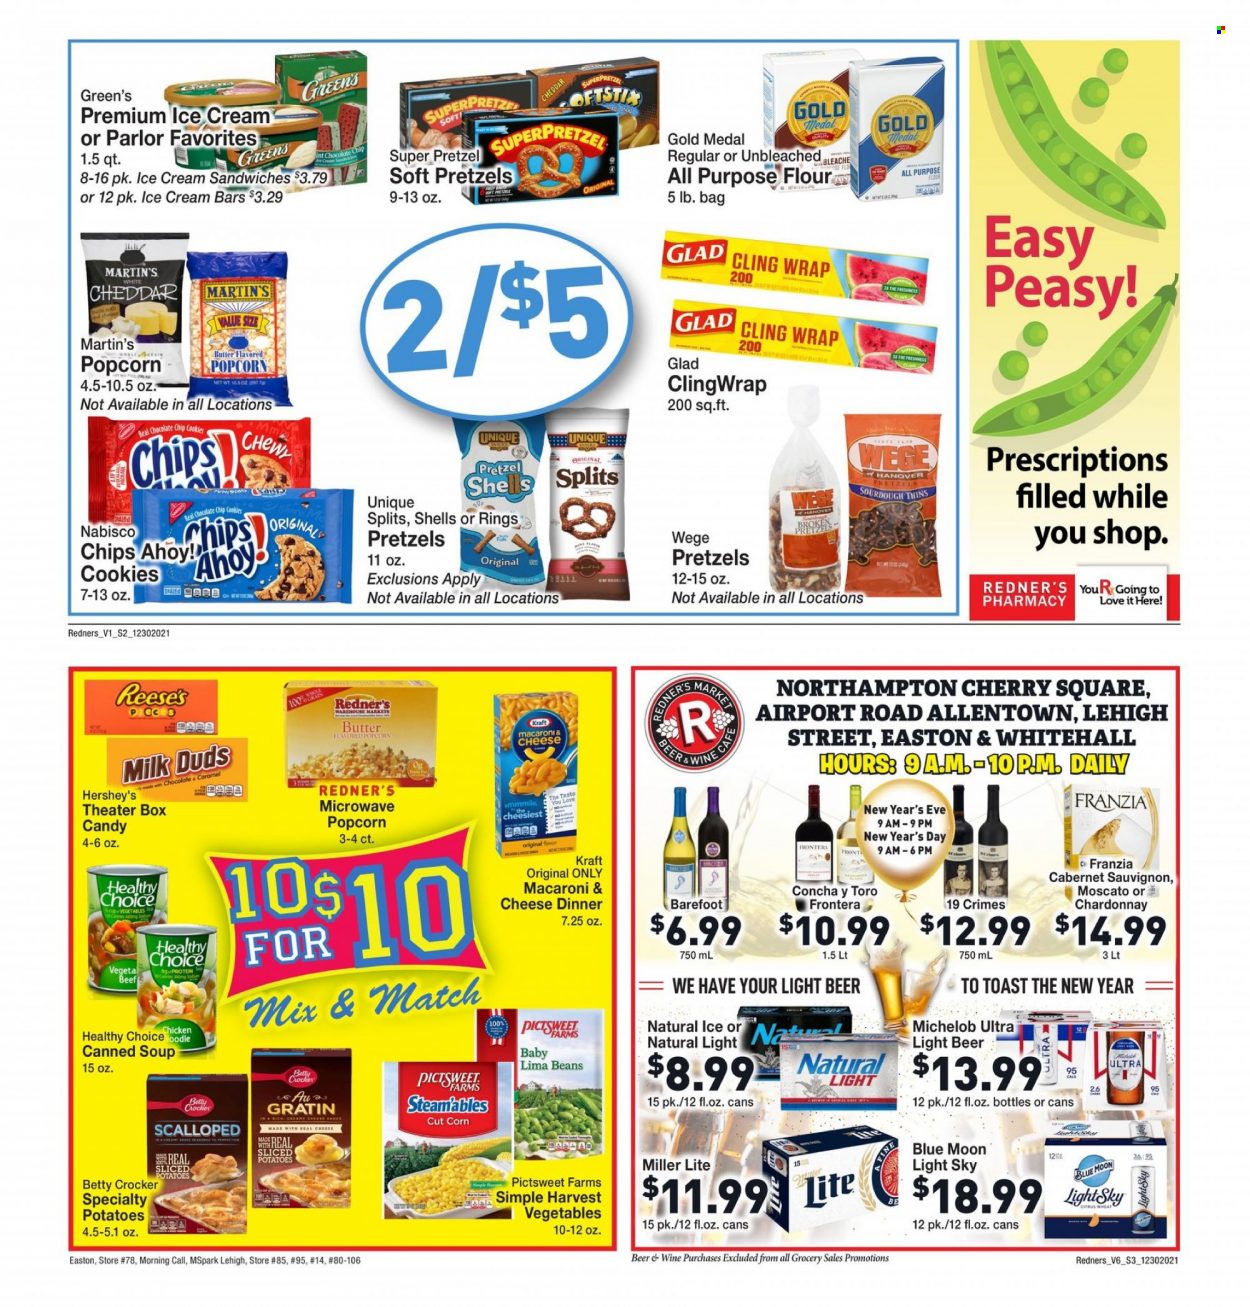 thumbnail - Redner's Markets Flyer - 12/30/2021 - 01/05/2022 - Sales products - pretzels, beans, corn, potatoes, cherries, macaroni & cheese, soup, Healthy Choice, Kraft®, butter, ice cream, ice cream bars, ice cream sandwich, Reese's, Hershey's, lima beans, cookies, Milk Duds, Chips Ahoy!, chips, Thins, popcorn, all purpose flour, flour, caramel, Cabernet Sauvignon, red wine, white wine, Chardonnay, wine, Moscato, beer, Miller Lite, Blue Moon, Michelob. Page 3.